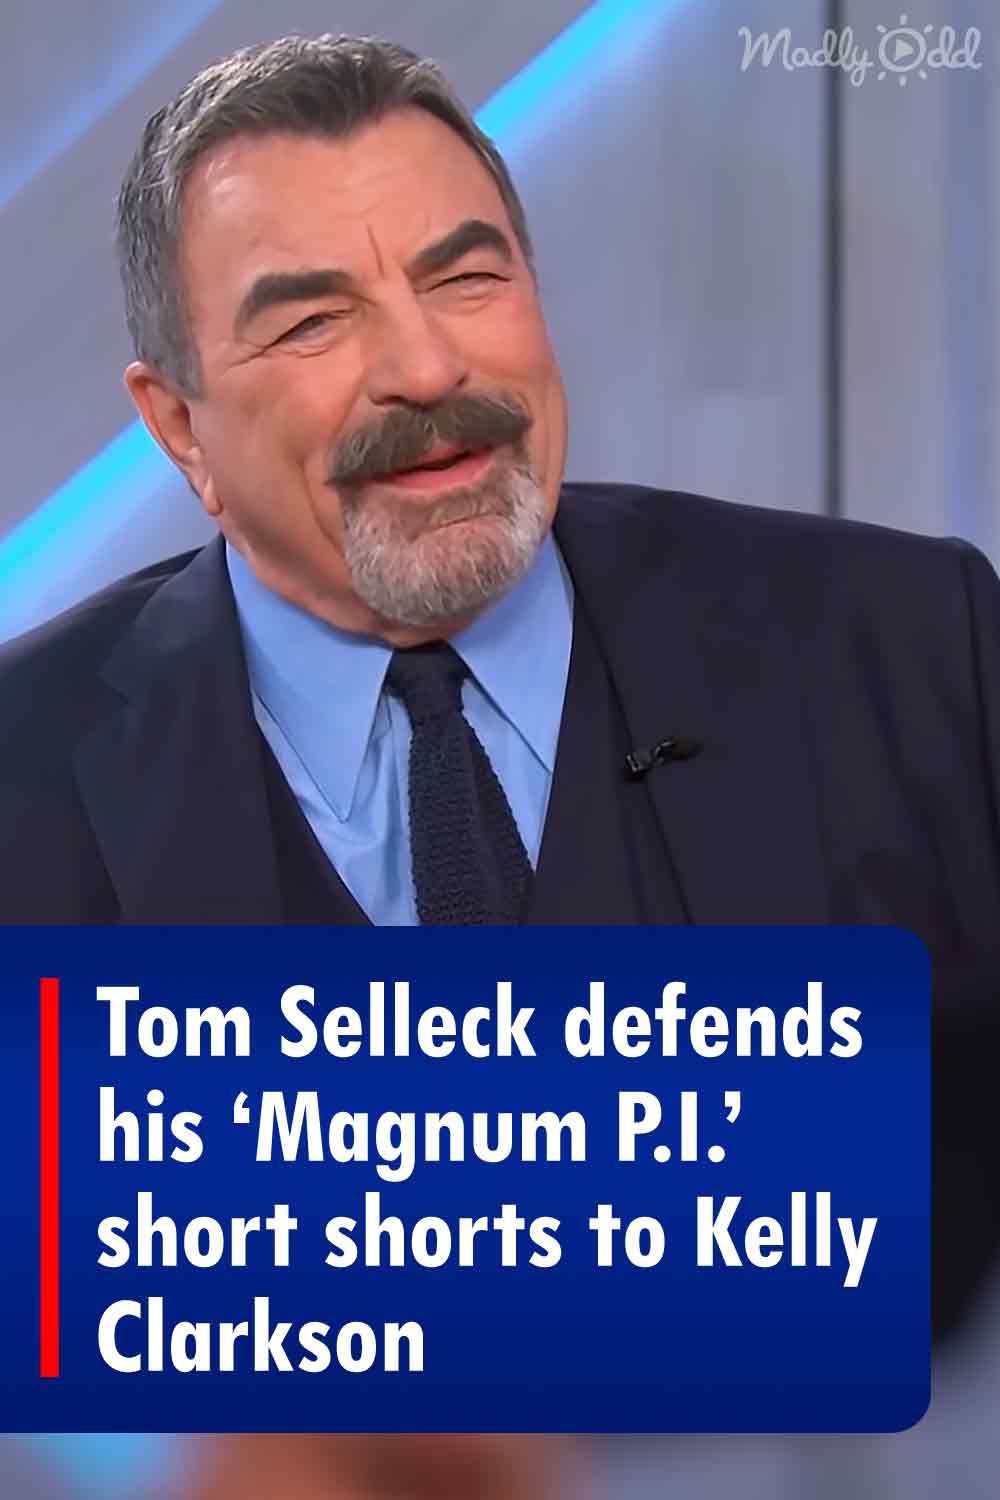 Tom Selleck defends his ‘Magnum P.I.’ short shorts to Kelly Clarkson